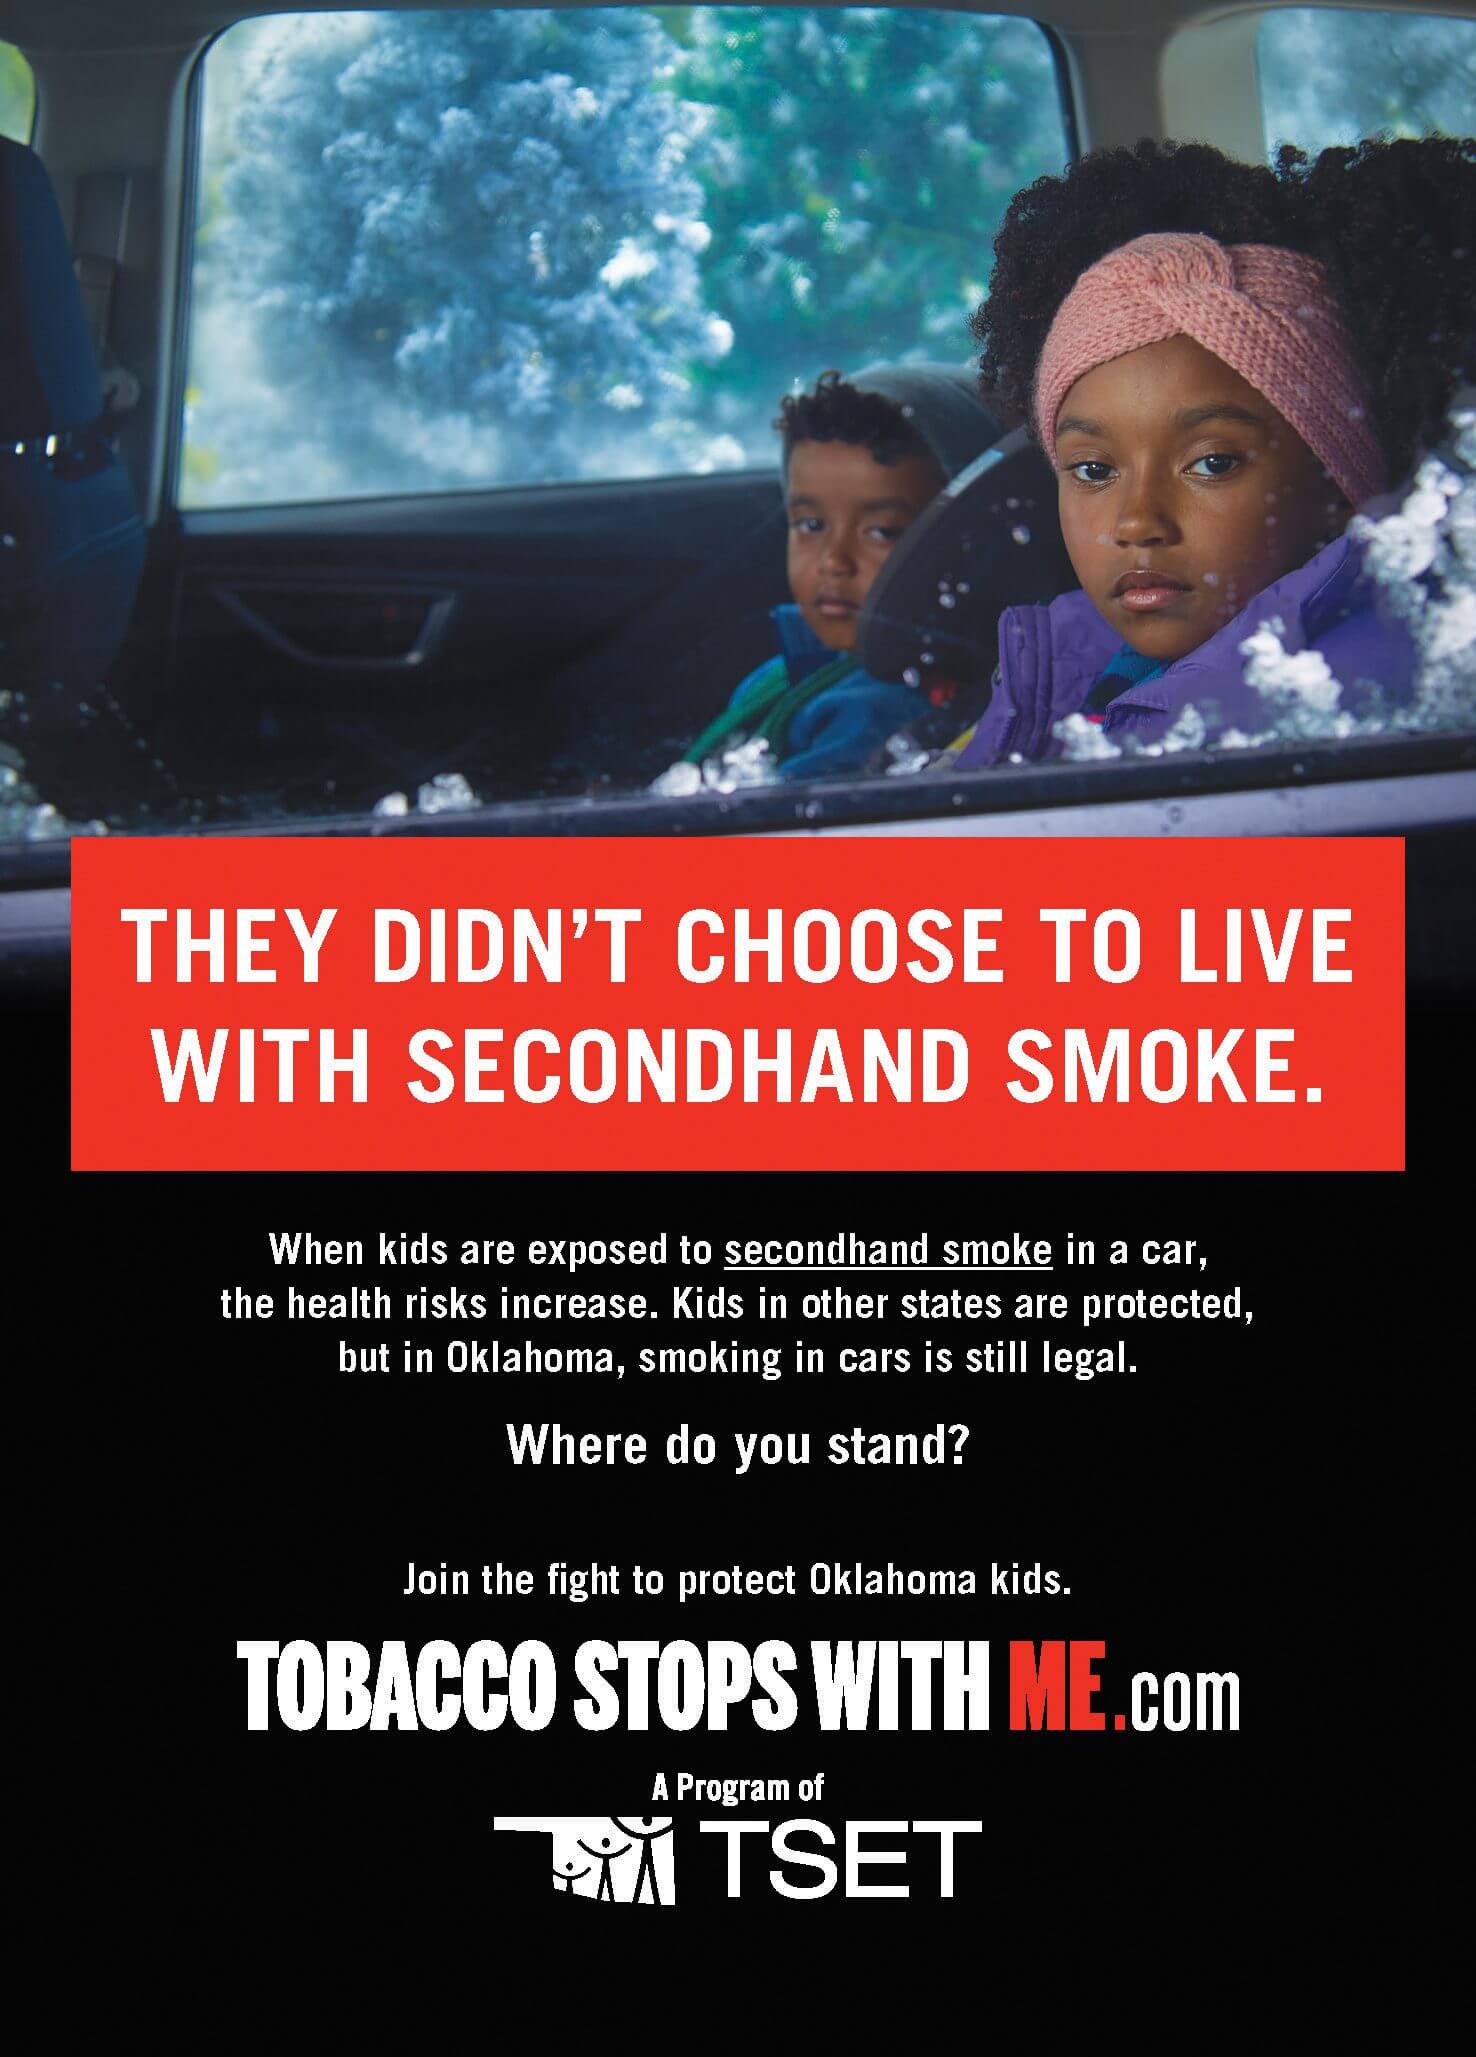 They didn't choose to live with secondhand smoke